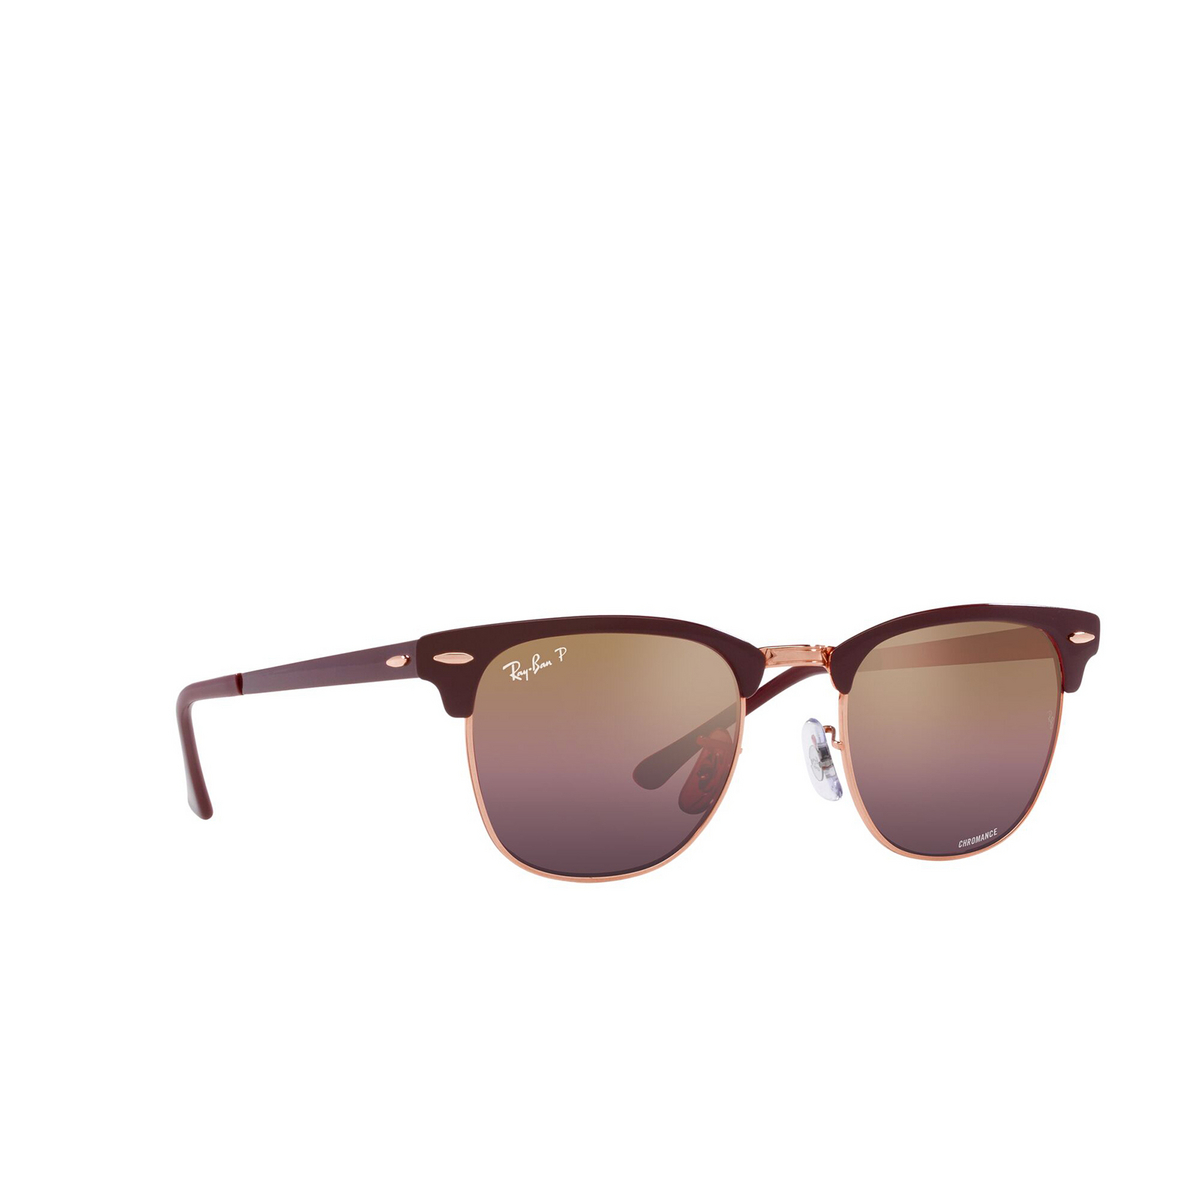 Ray-Ban CLUBMASTER METAL Sunglasses 9253G9 Bordeaux On Rose Gold - three-quarters view